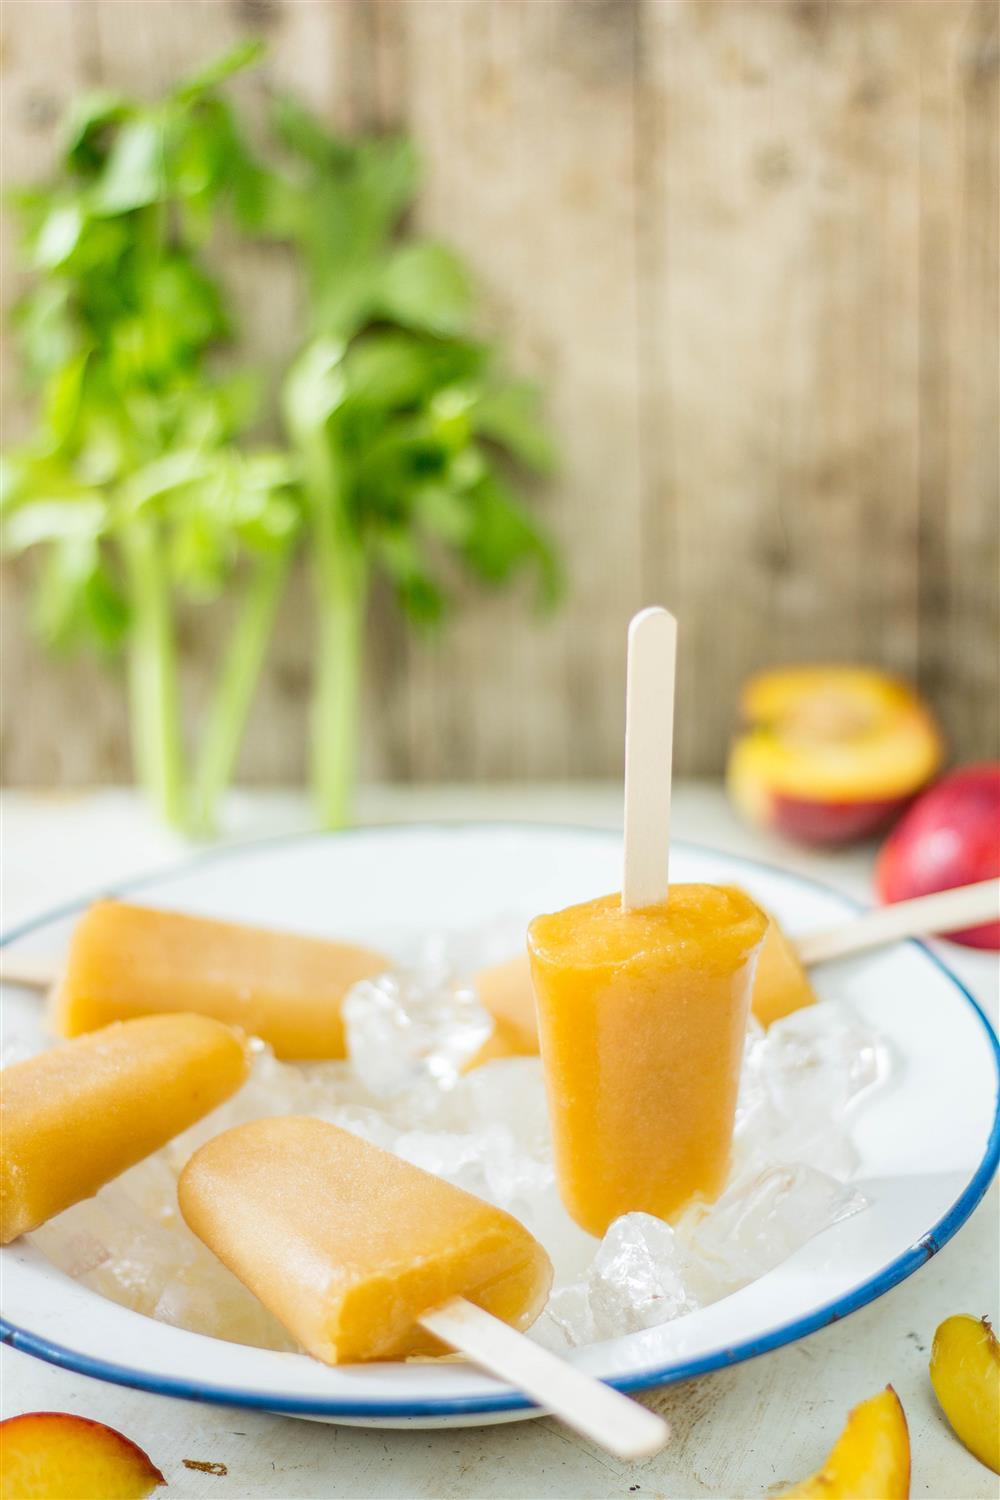 Use Your Noodles - Peach and Celery Ice Lollies